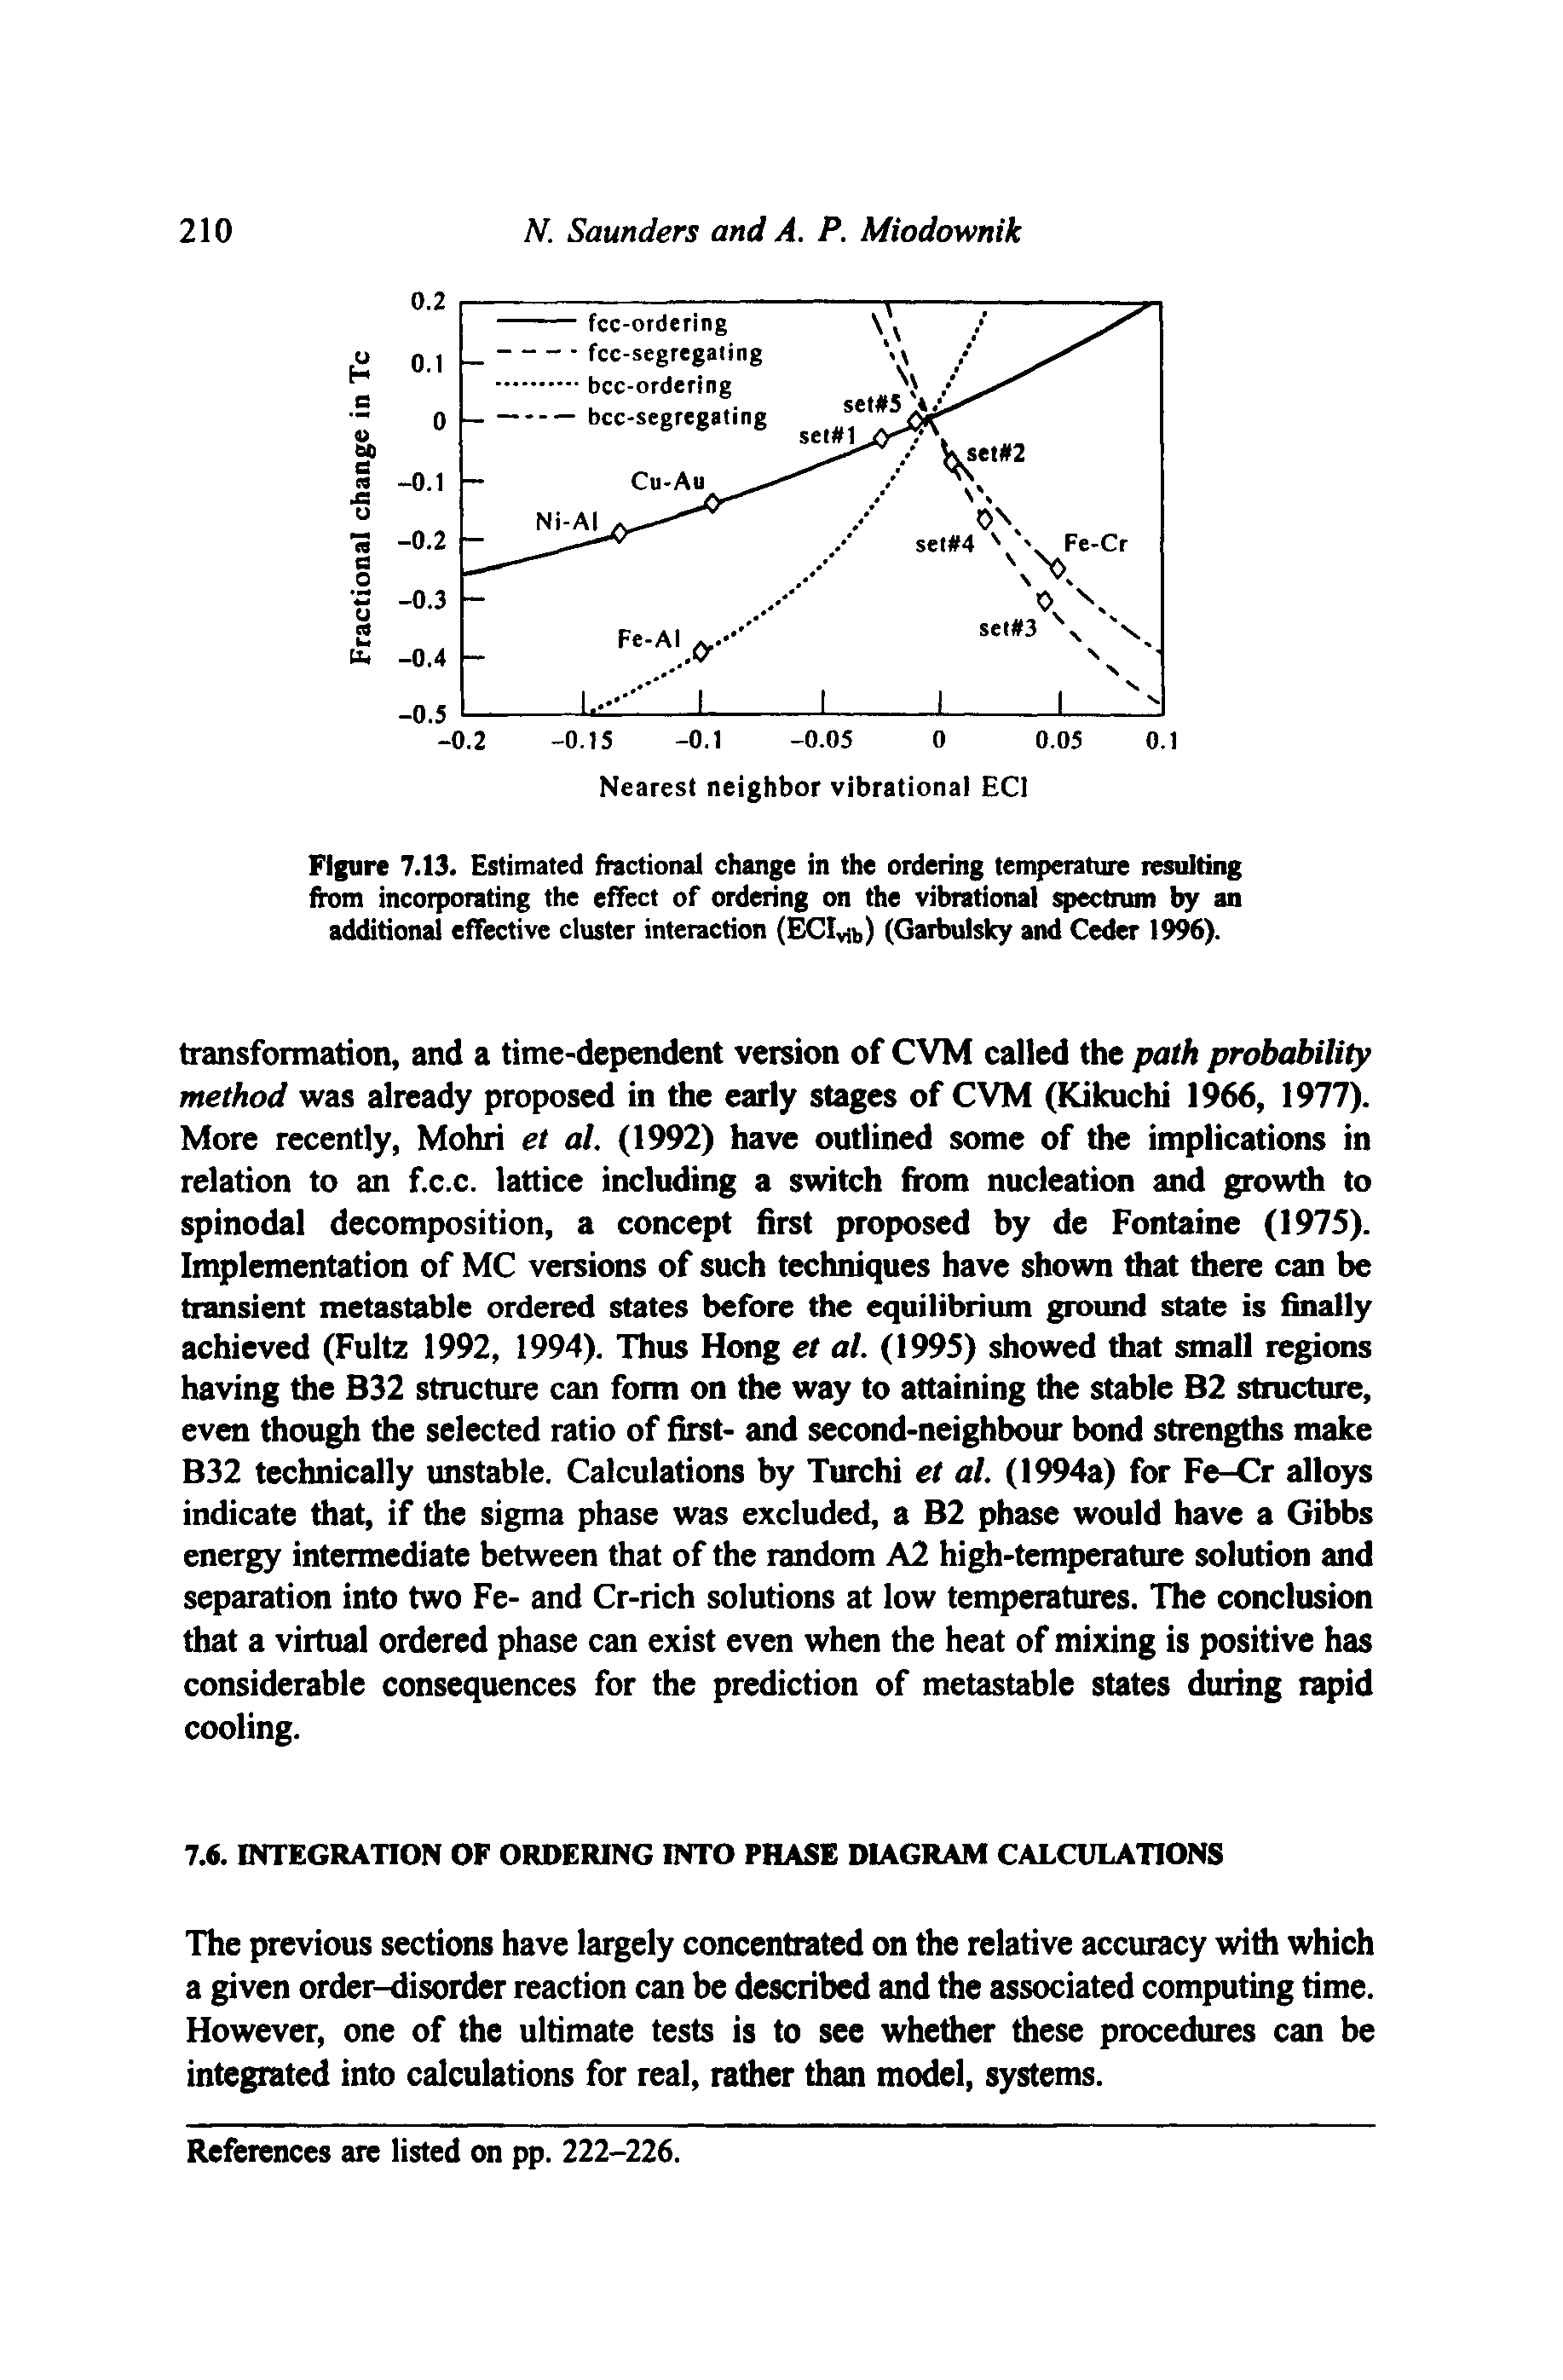 Figure 7.13. Estimated fractional change in the ordering temperature resulting fiem incorporating the effect of ordering on the vibrational spectrum by an additional effective cluster interaction (ElCIvib) (Gaibulsky and Ceder 1996).